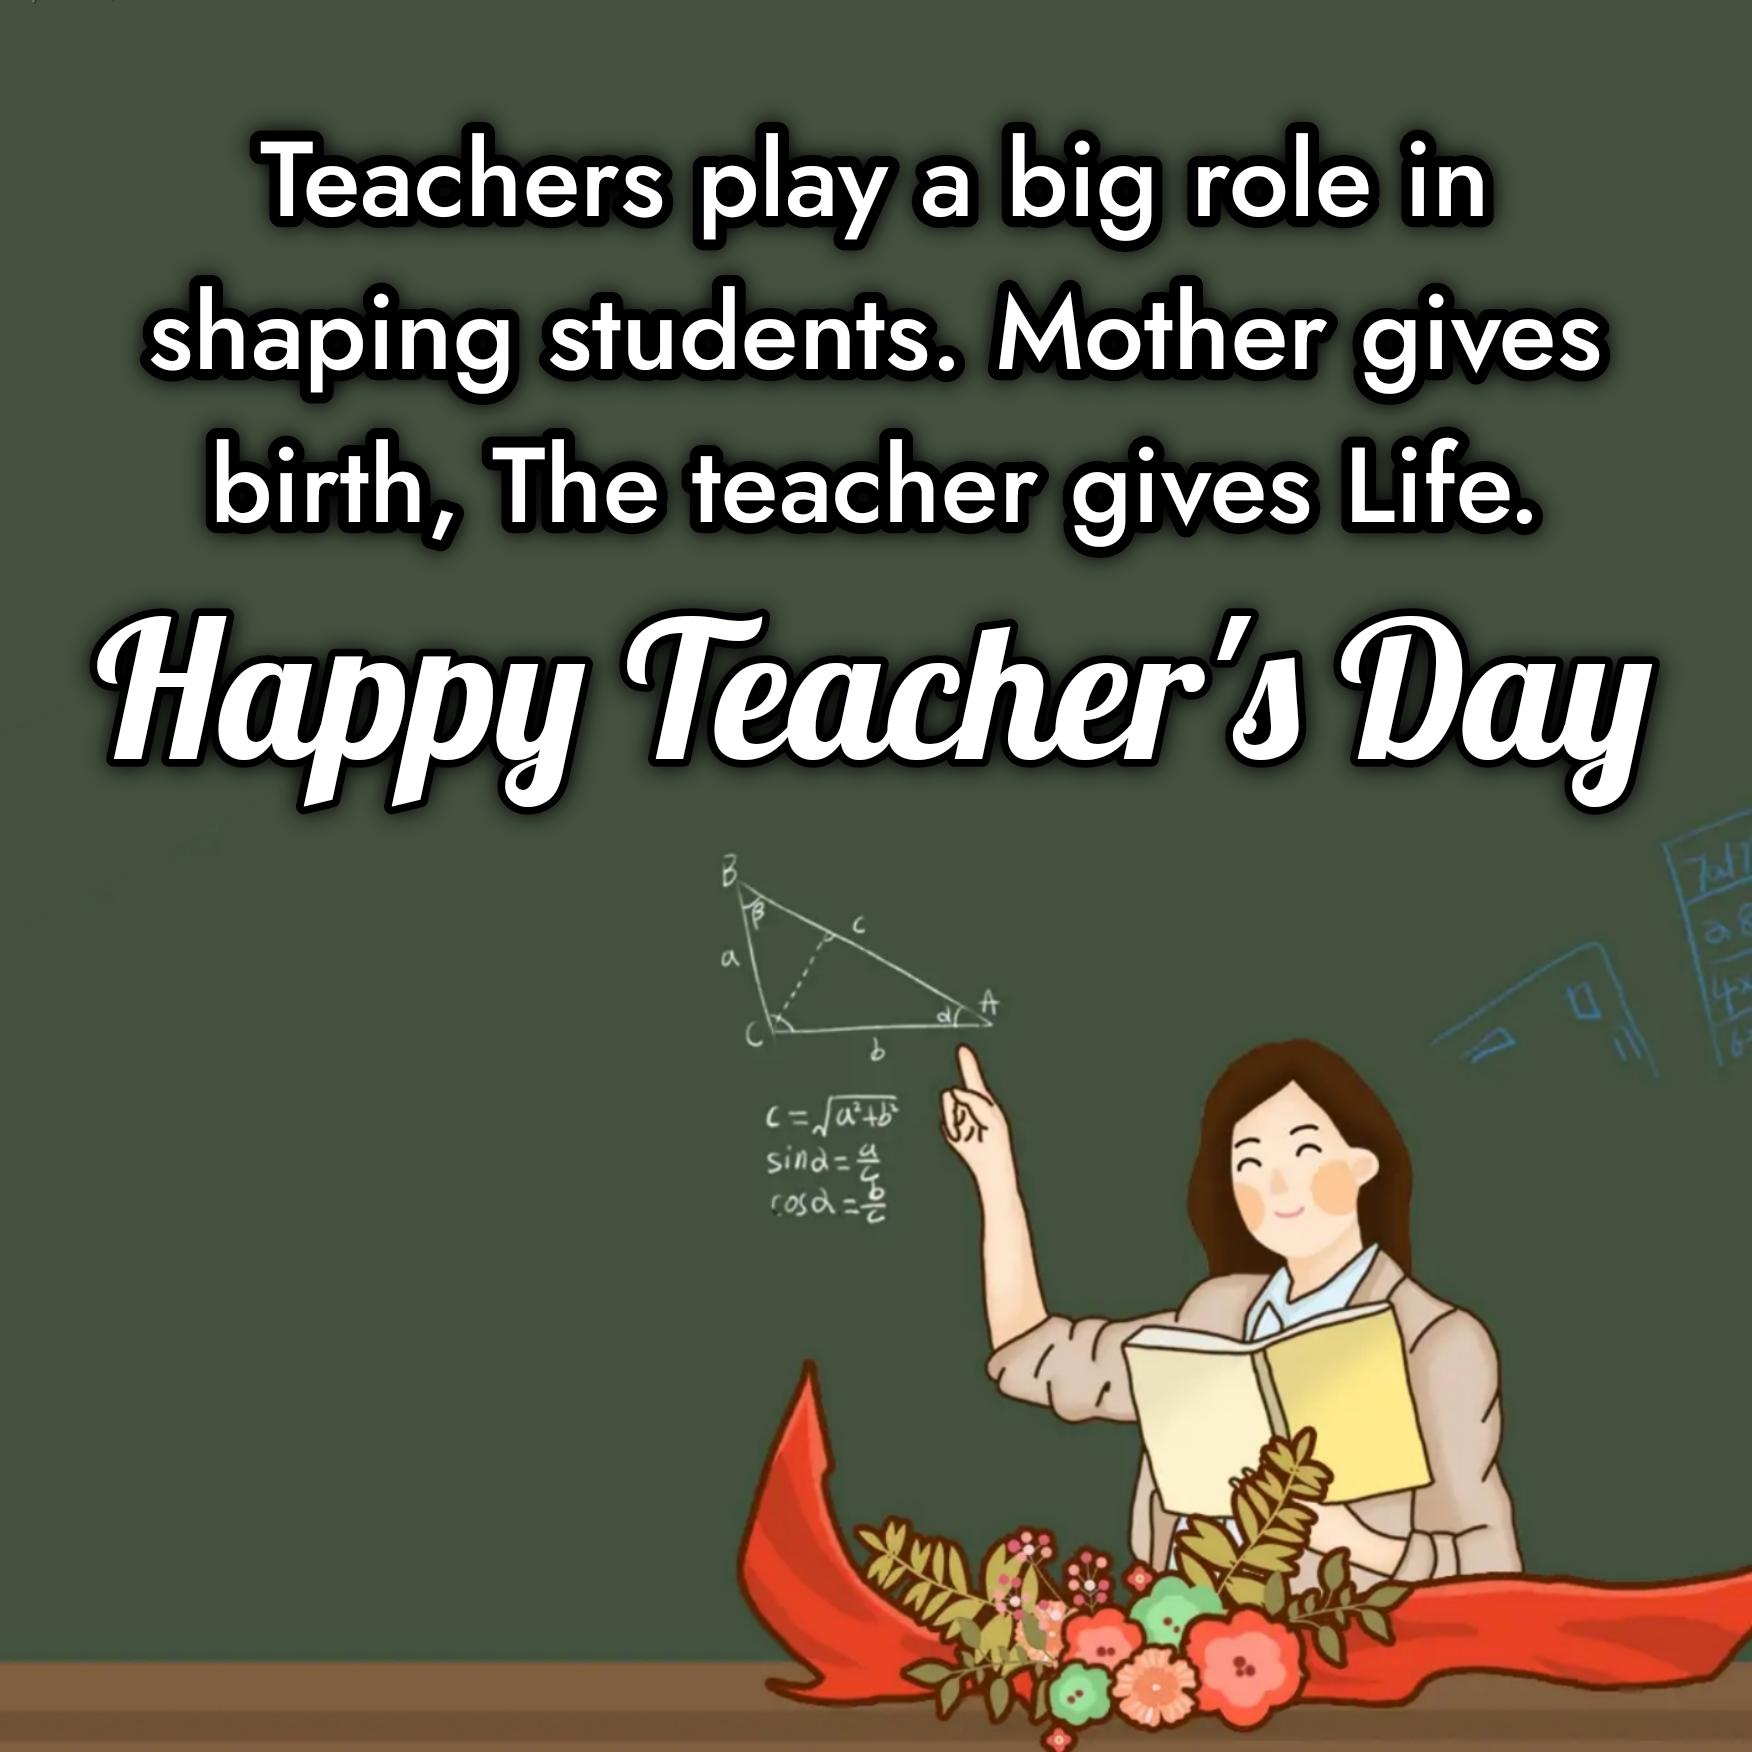 Teachers play a big role in shaping students.